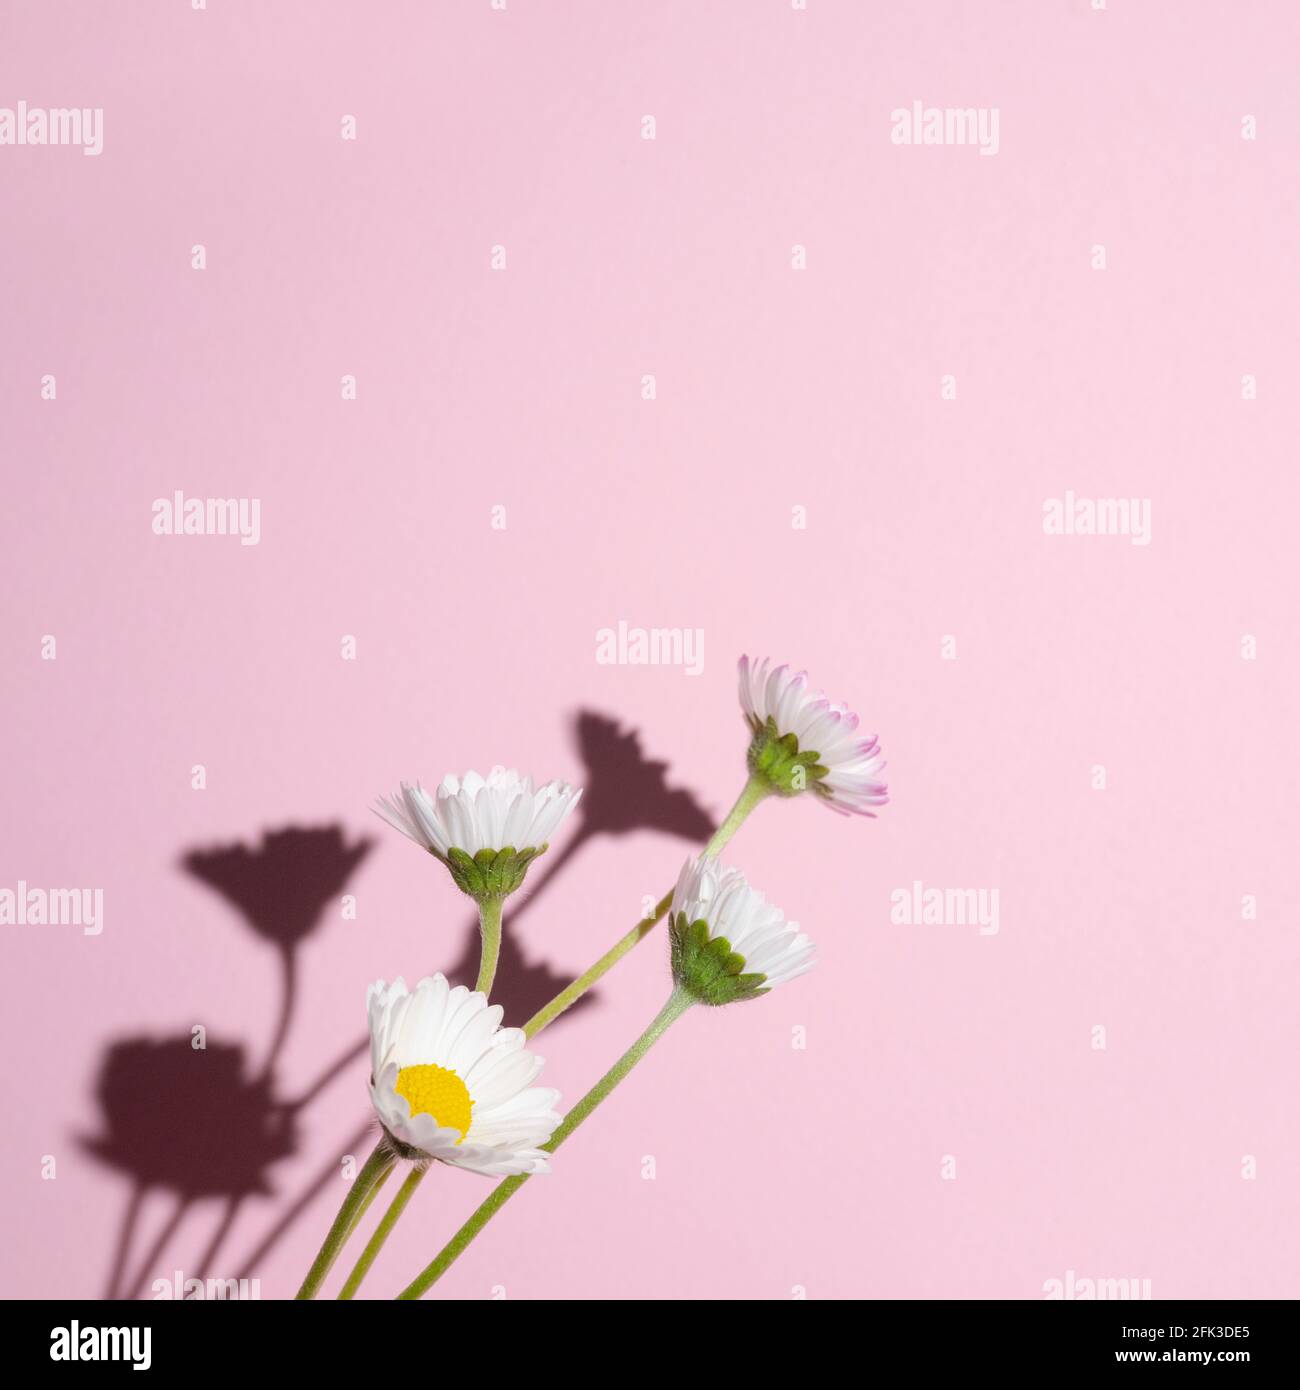 some daisies with their hard shadow on a pink background Stock Photo